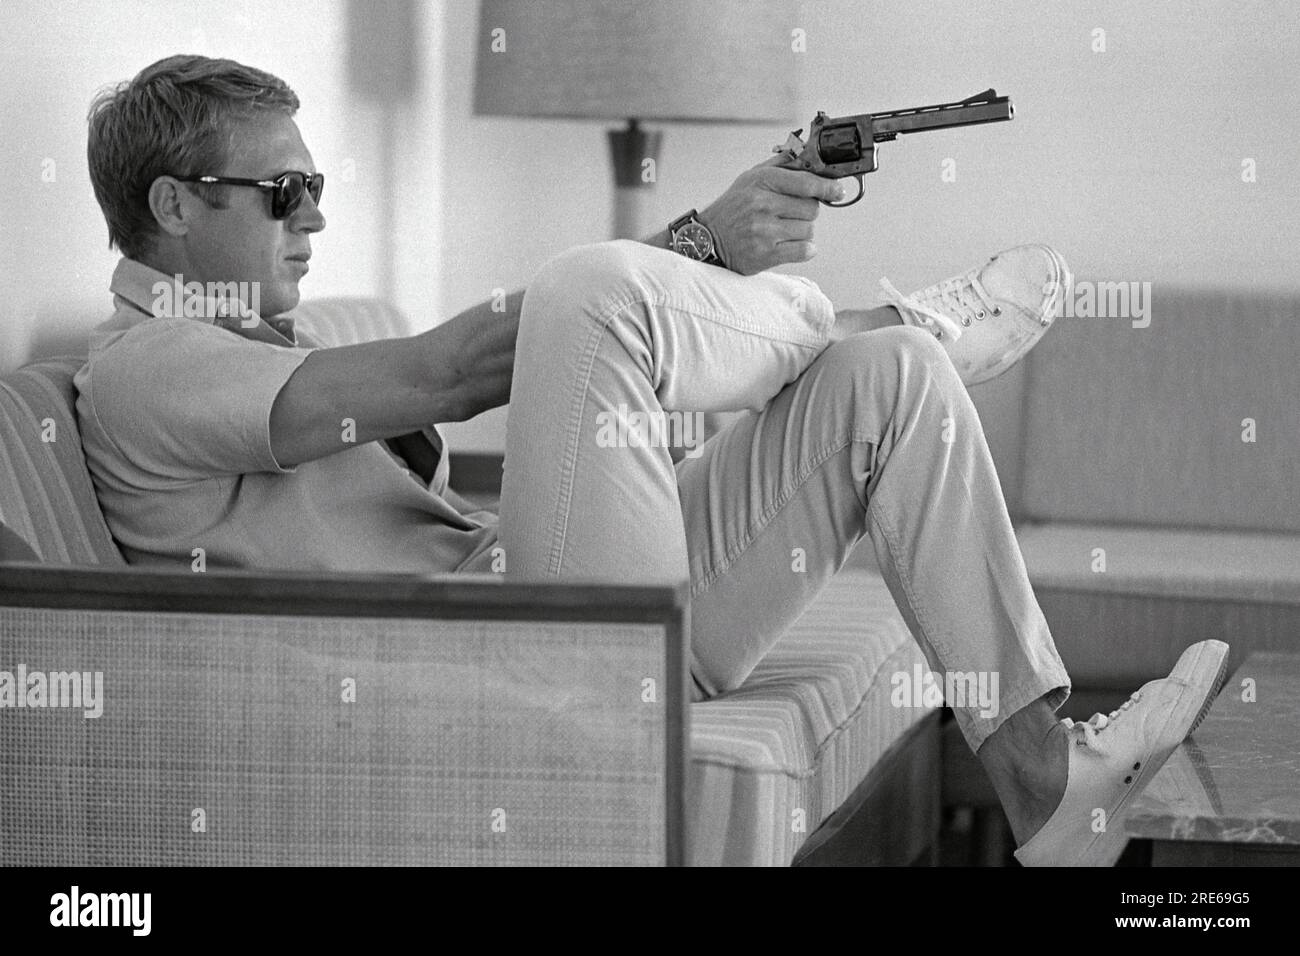 Profile view of American actor Steve McQueen (1930 - 1980) sitting on a sofa in his home in Palm Springs, California, sunglasses over his eyes as he aims a handgun. Steve McQueen, widely considered one of the coolest and most charismatic actors of the 1960s and 1970s, wears a white shirt and blue jeans. Steve McQueen looks focused and determined, with a slight twinkle in his eye and a firm grip around his gun. The background is indistinct and out of focus, creating a sense of isolation for the sitter. The overall mood of the image is one of toughness, confidence, and a sense of danger. Stock Photo